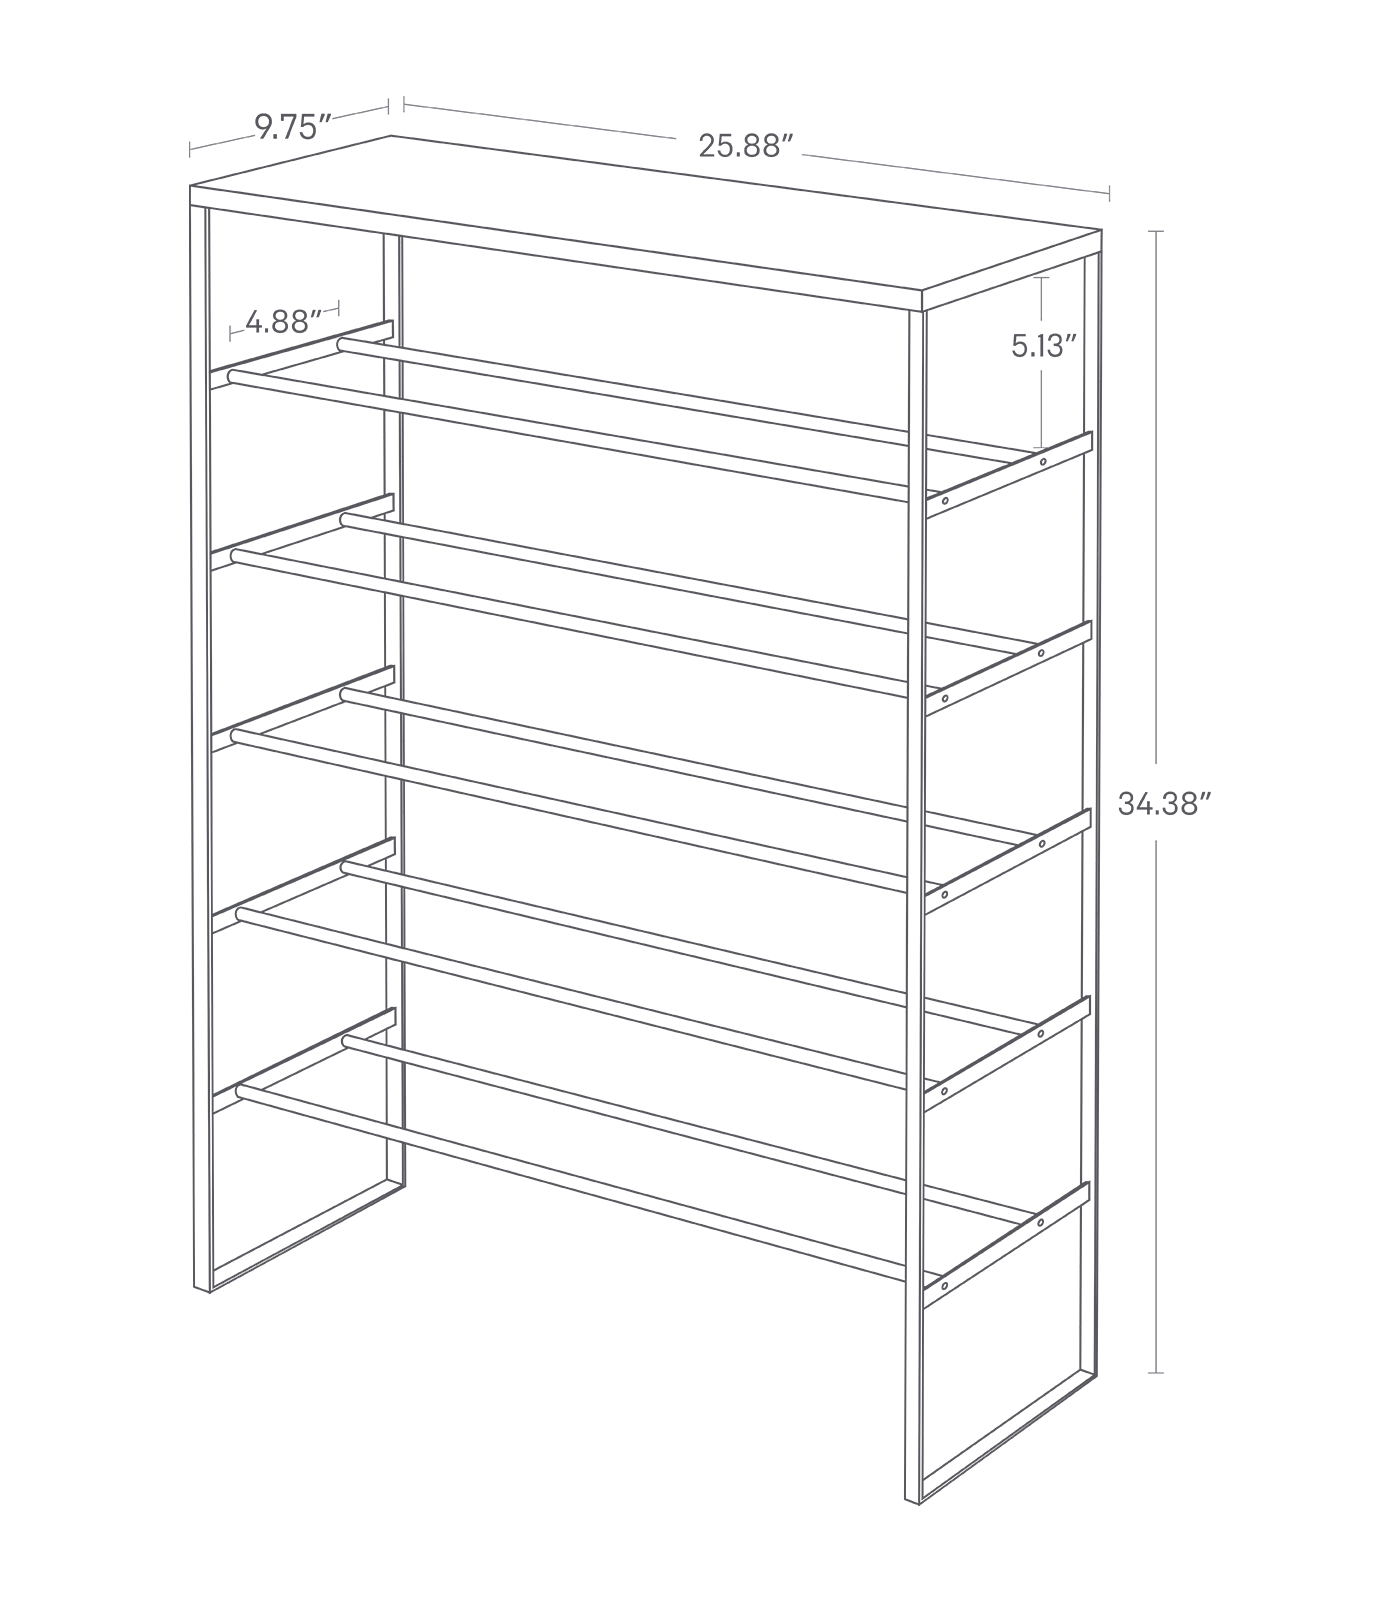 Dimension image for Six-Tier Shoe Rack showing a total height of 34.38